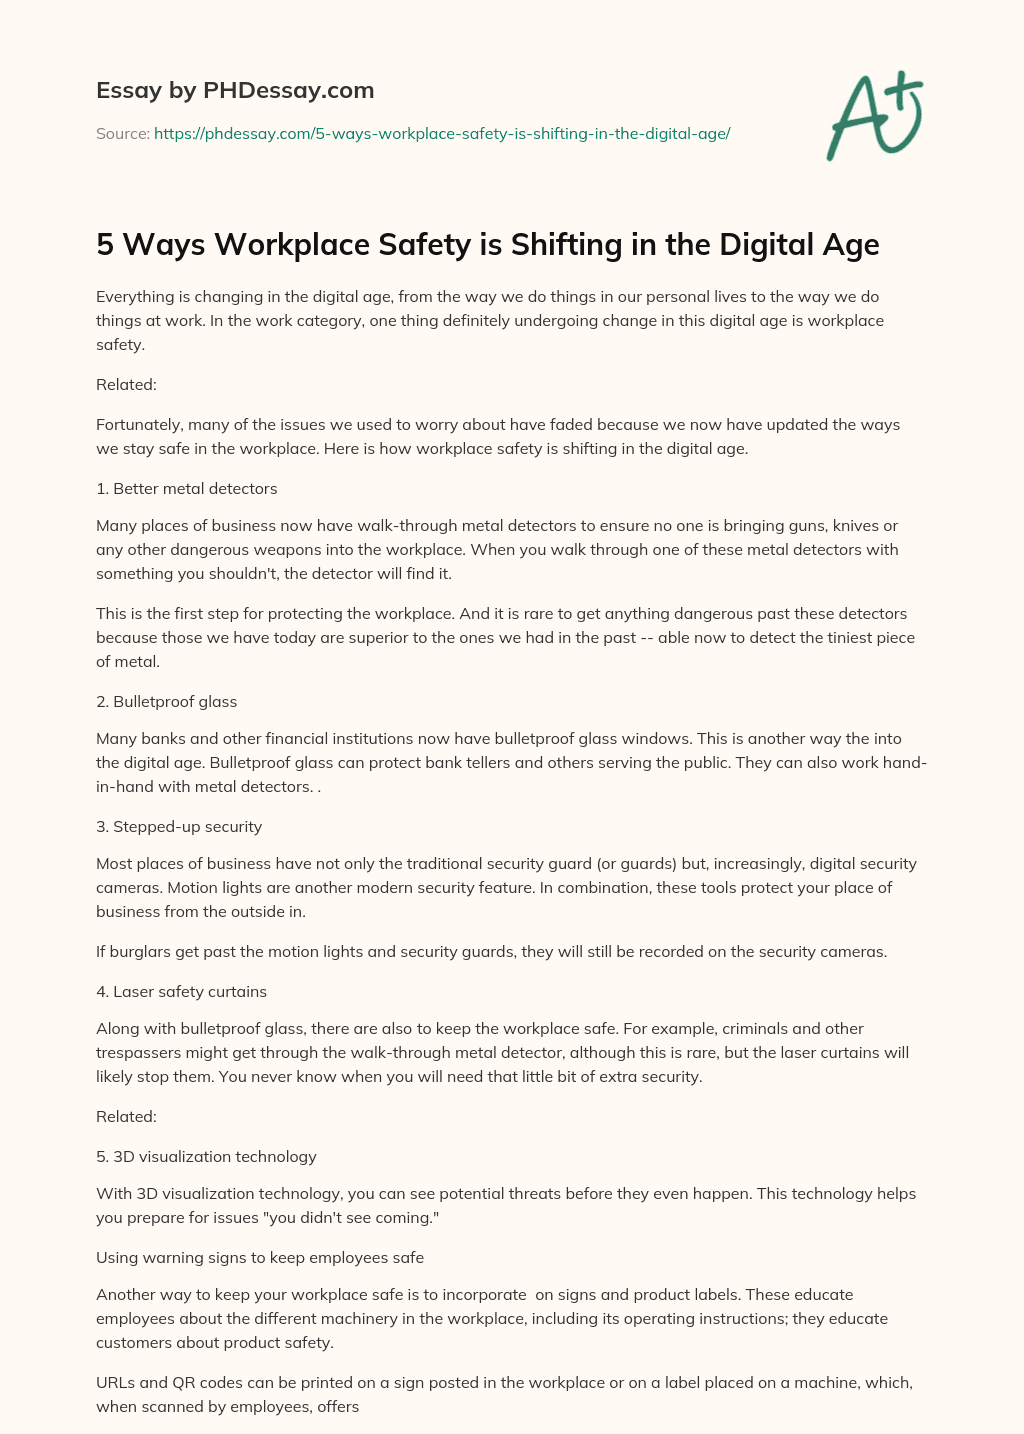 5 Ways Workplace Safety is Shifting in the Digital Age essay